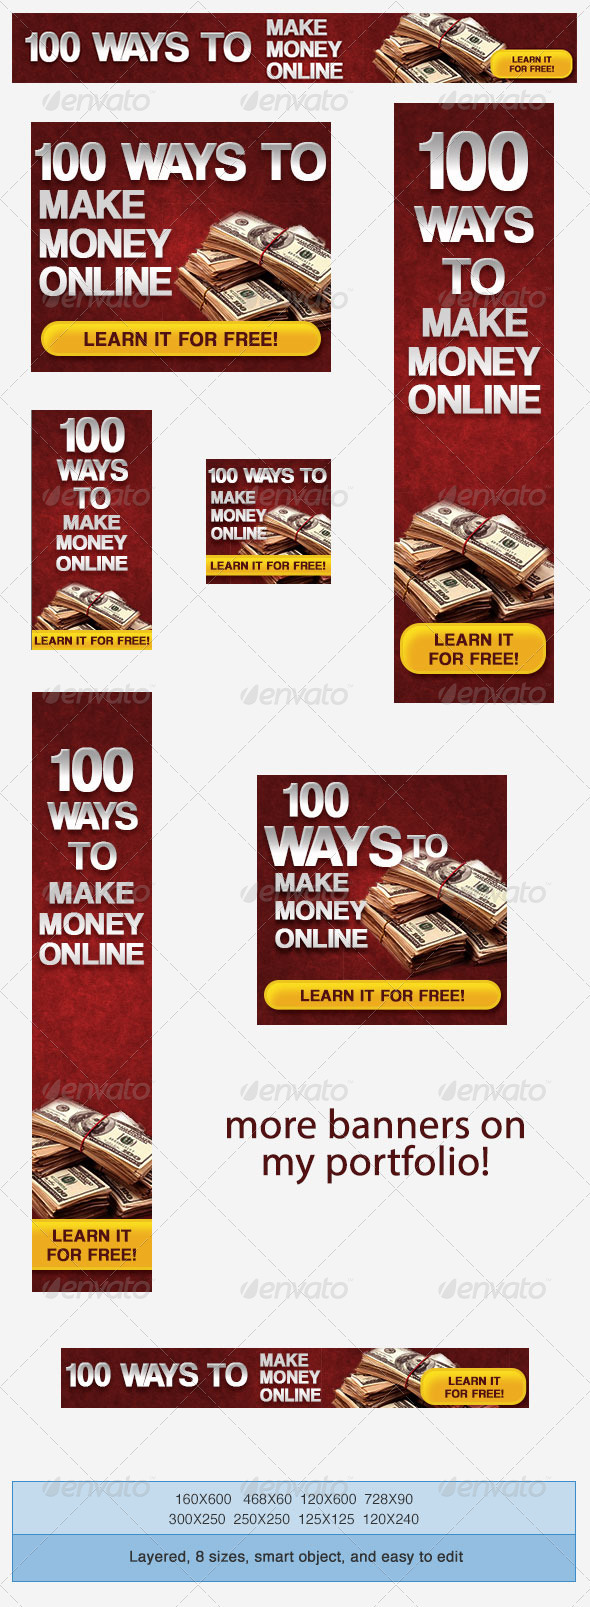 Make Money Online Banner Ad Template - Banners & Ads Web Elements